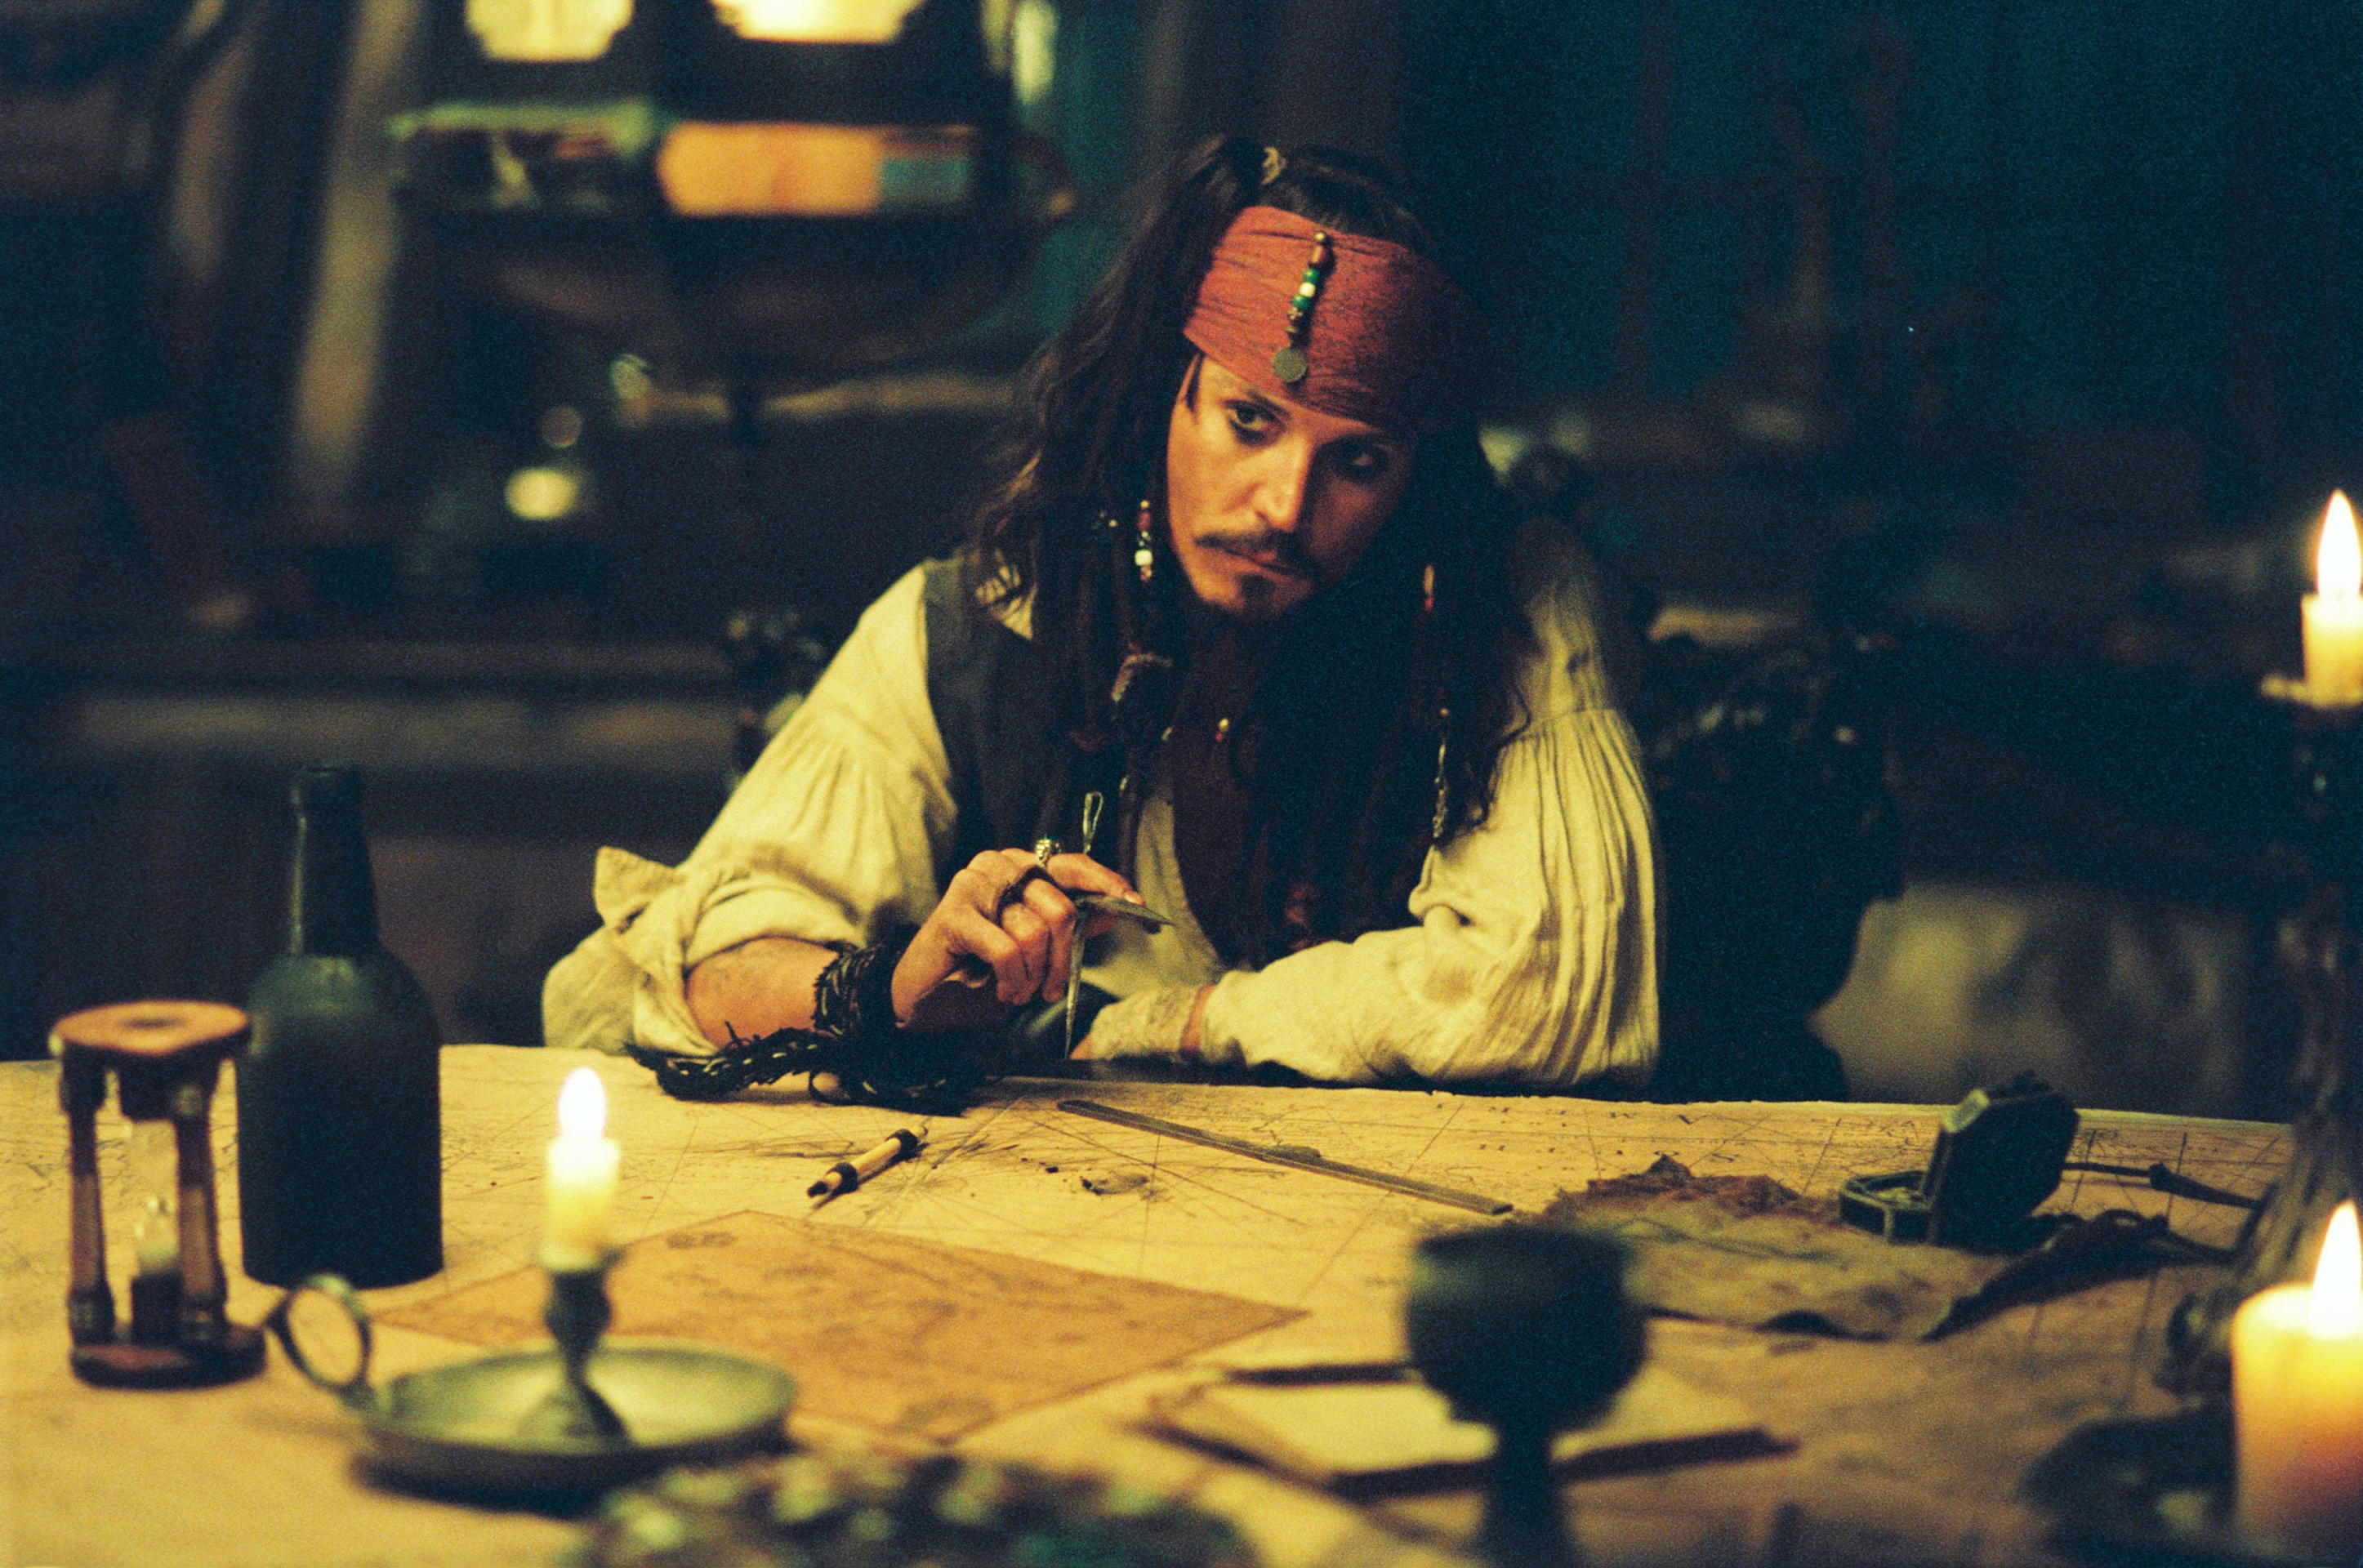 johnny depp, jack sparrow, pirates of the caribbean, movie, pirates of the caribbean: dead man's chest wallpapers for tablet